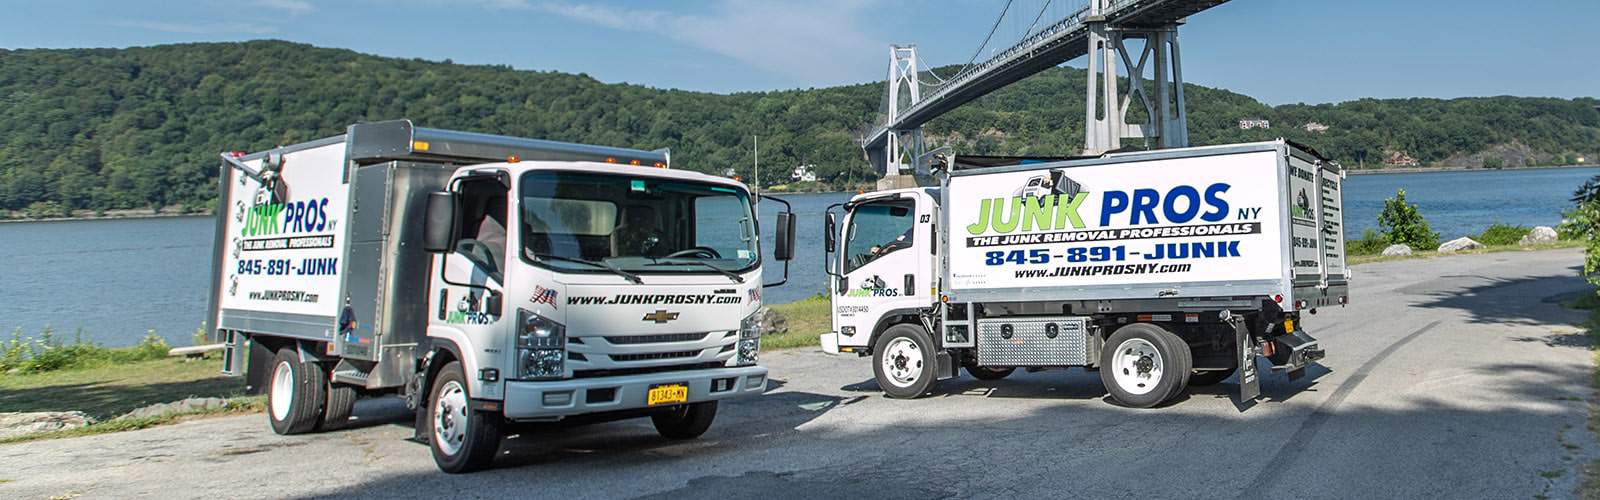 Junk Pros NY, offering junk removal in Kingston, NY